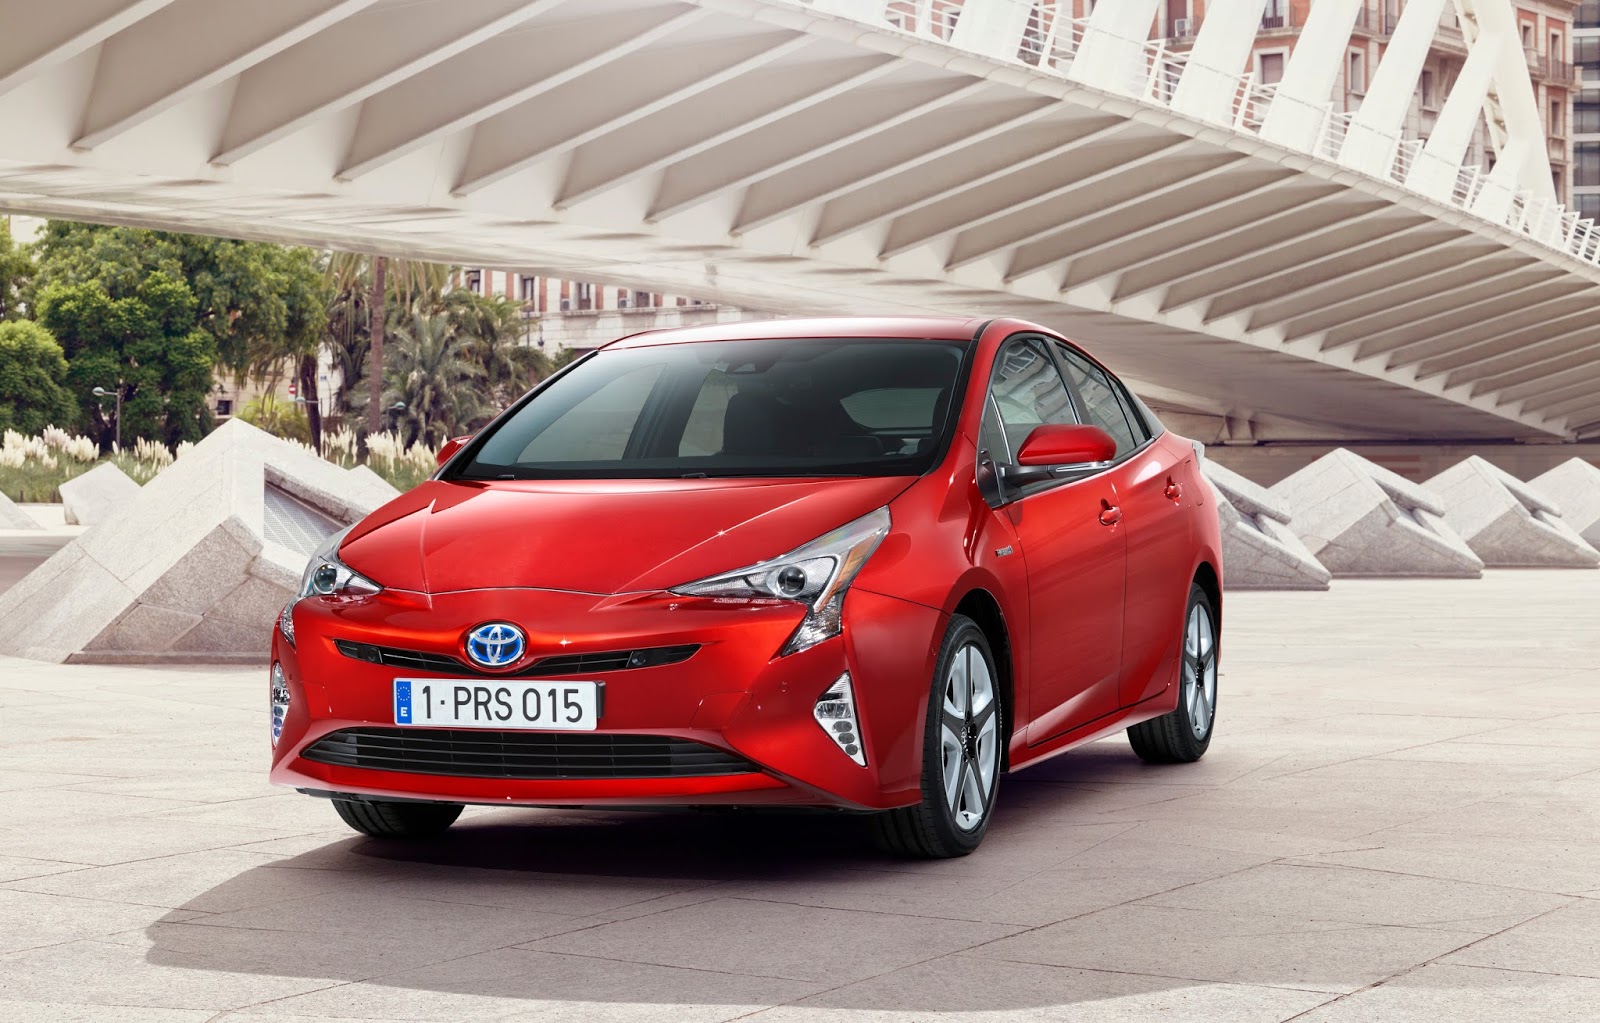 Toyota unveils Prius hybrid with 10 better fuel efficiency [VIDEO